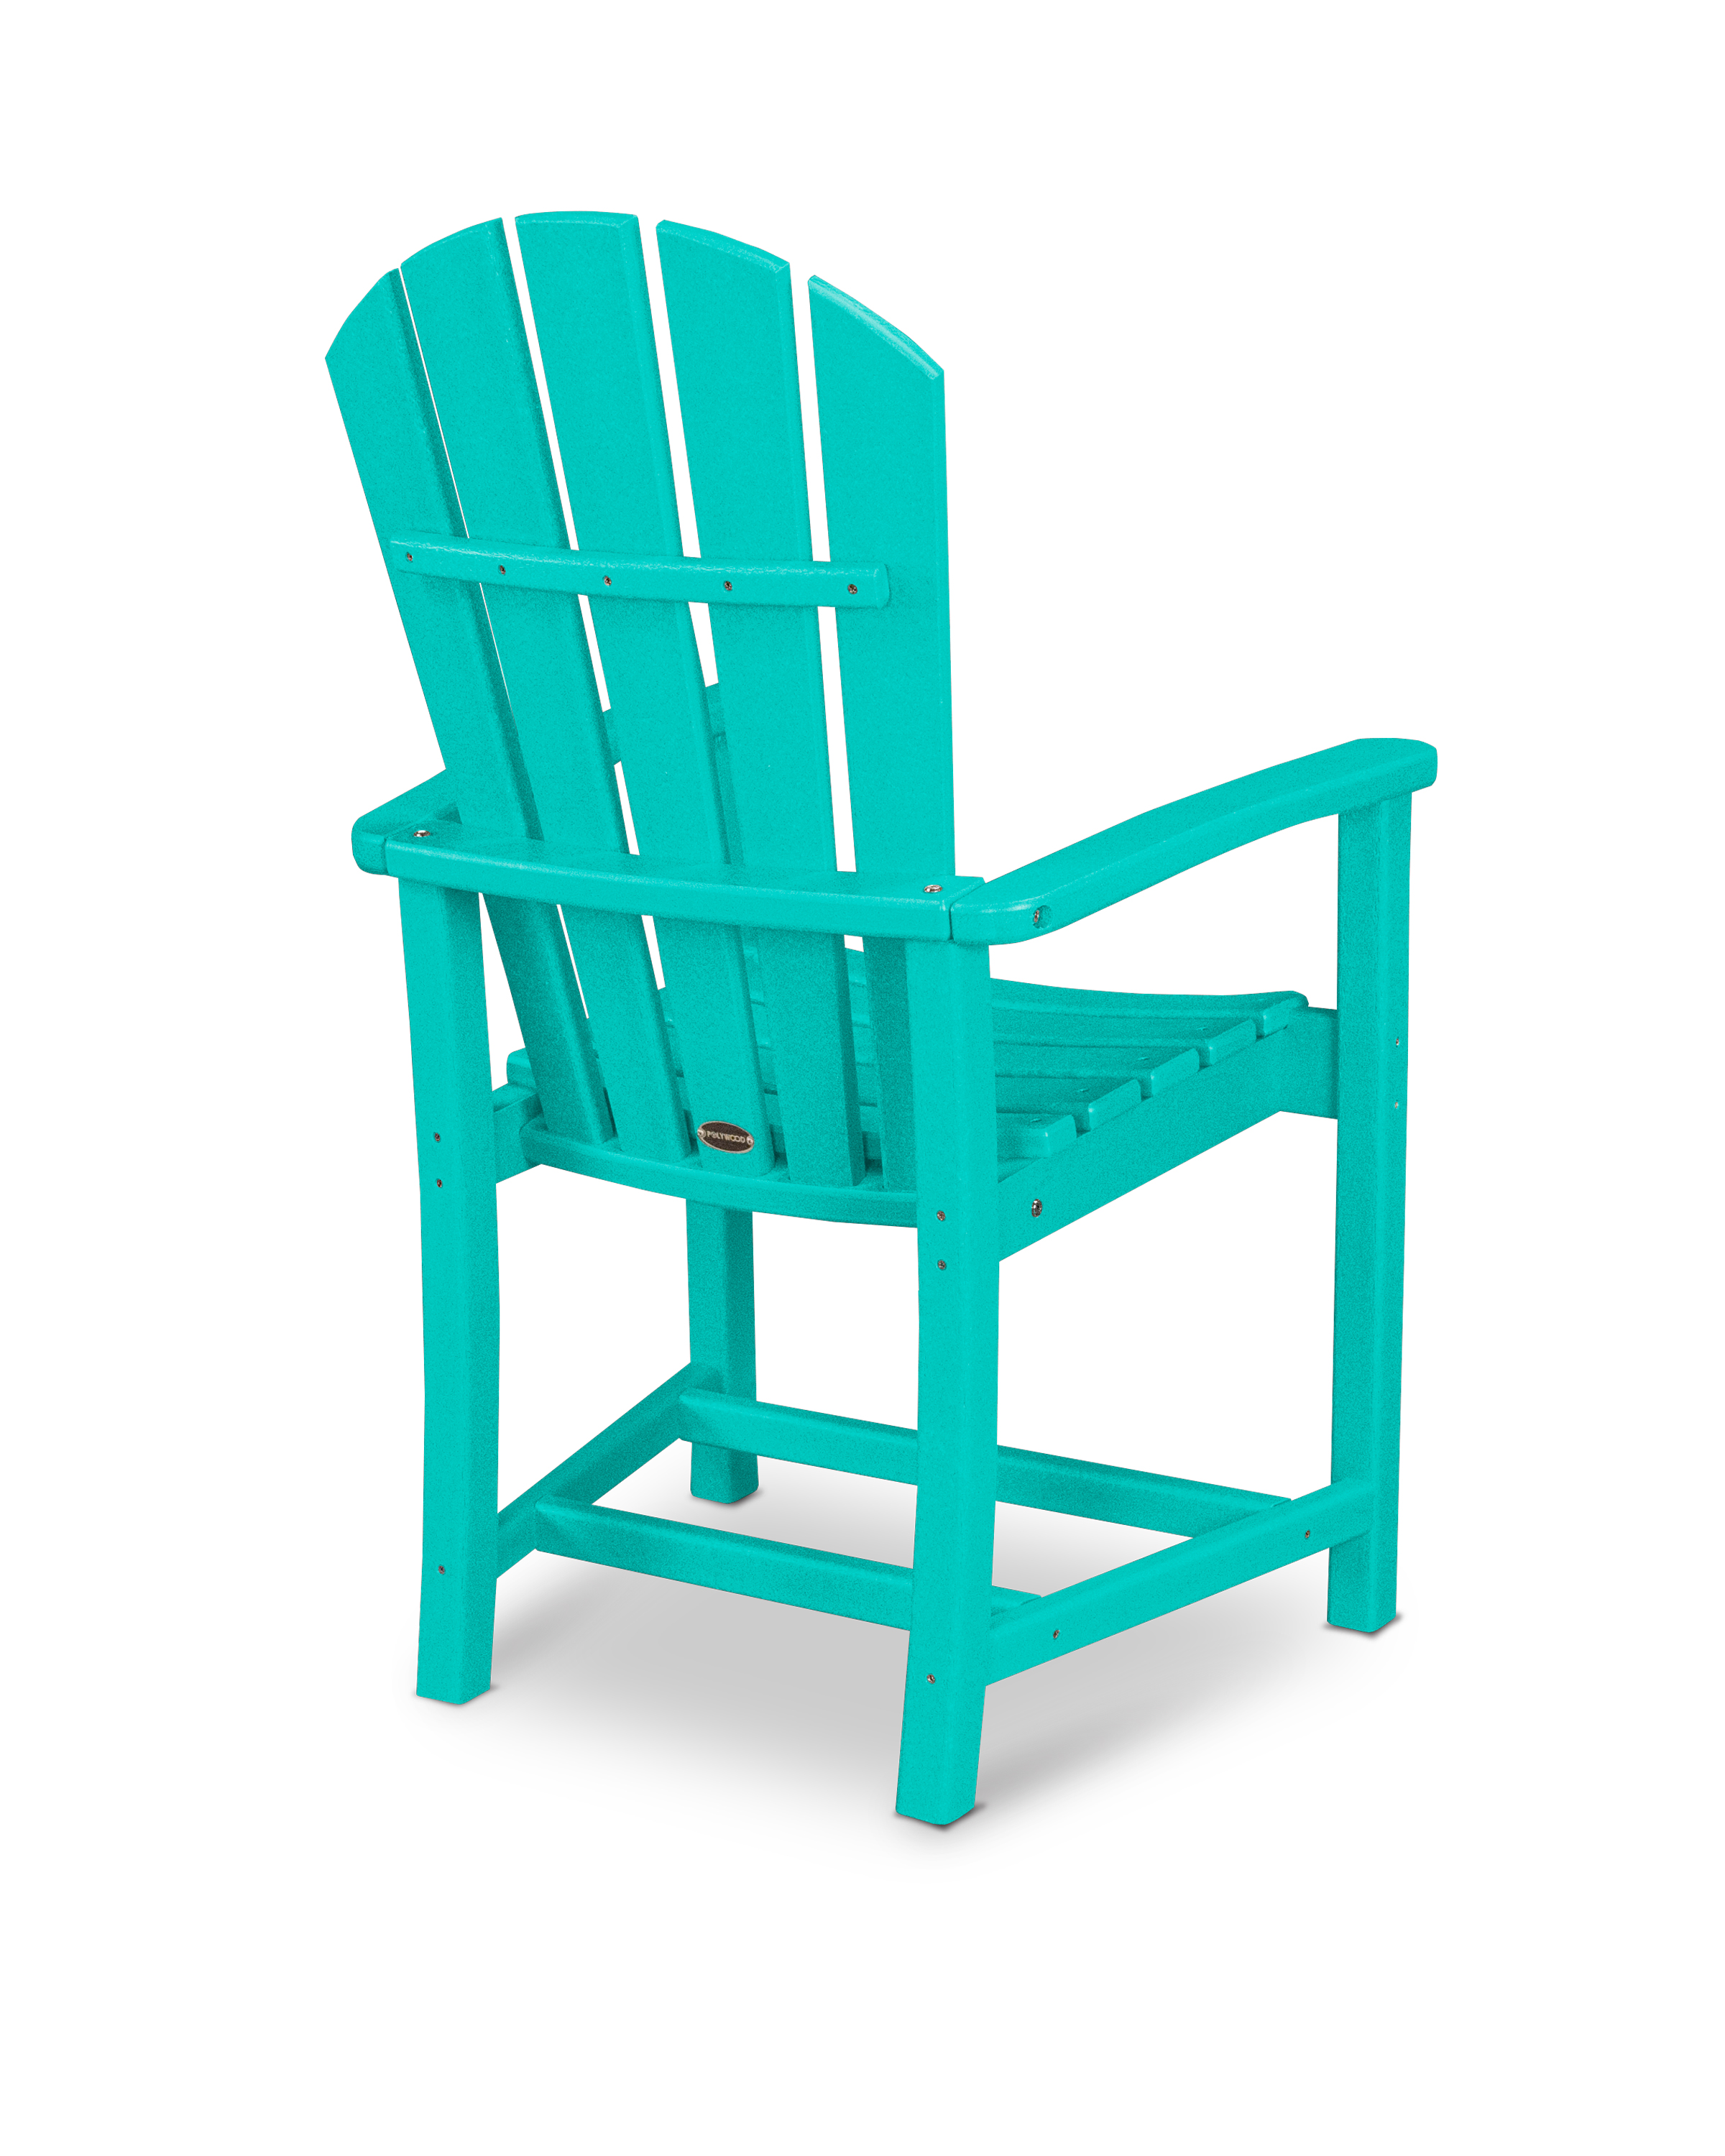 The Palm Coast Dining Chair Combines The Back Design Of Our Palm Coast Adirondack With An Upright Seat, Perfect For Comfortable Dining. Constructed Of Durable Polywood